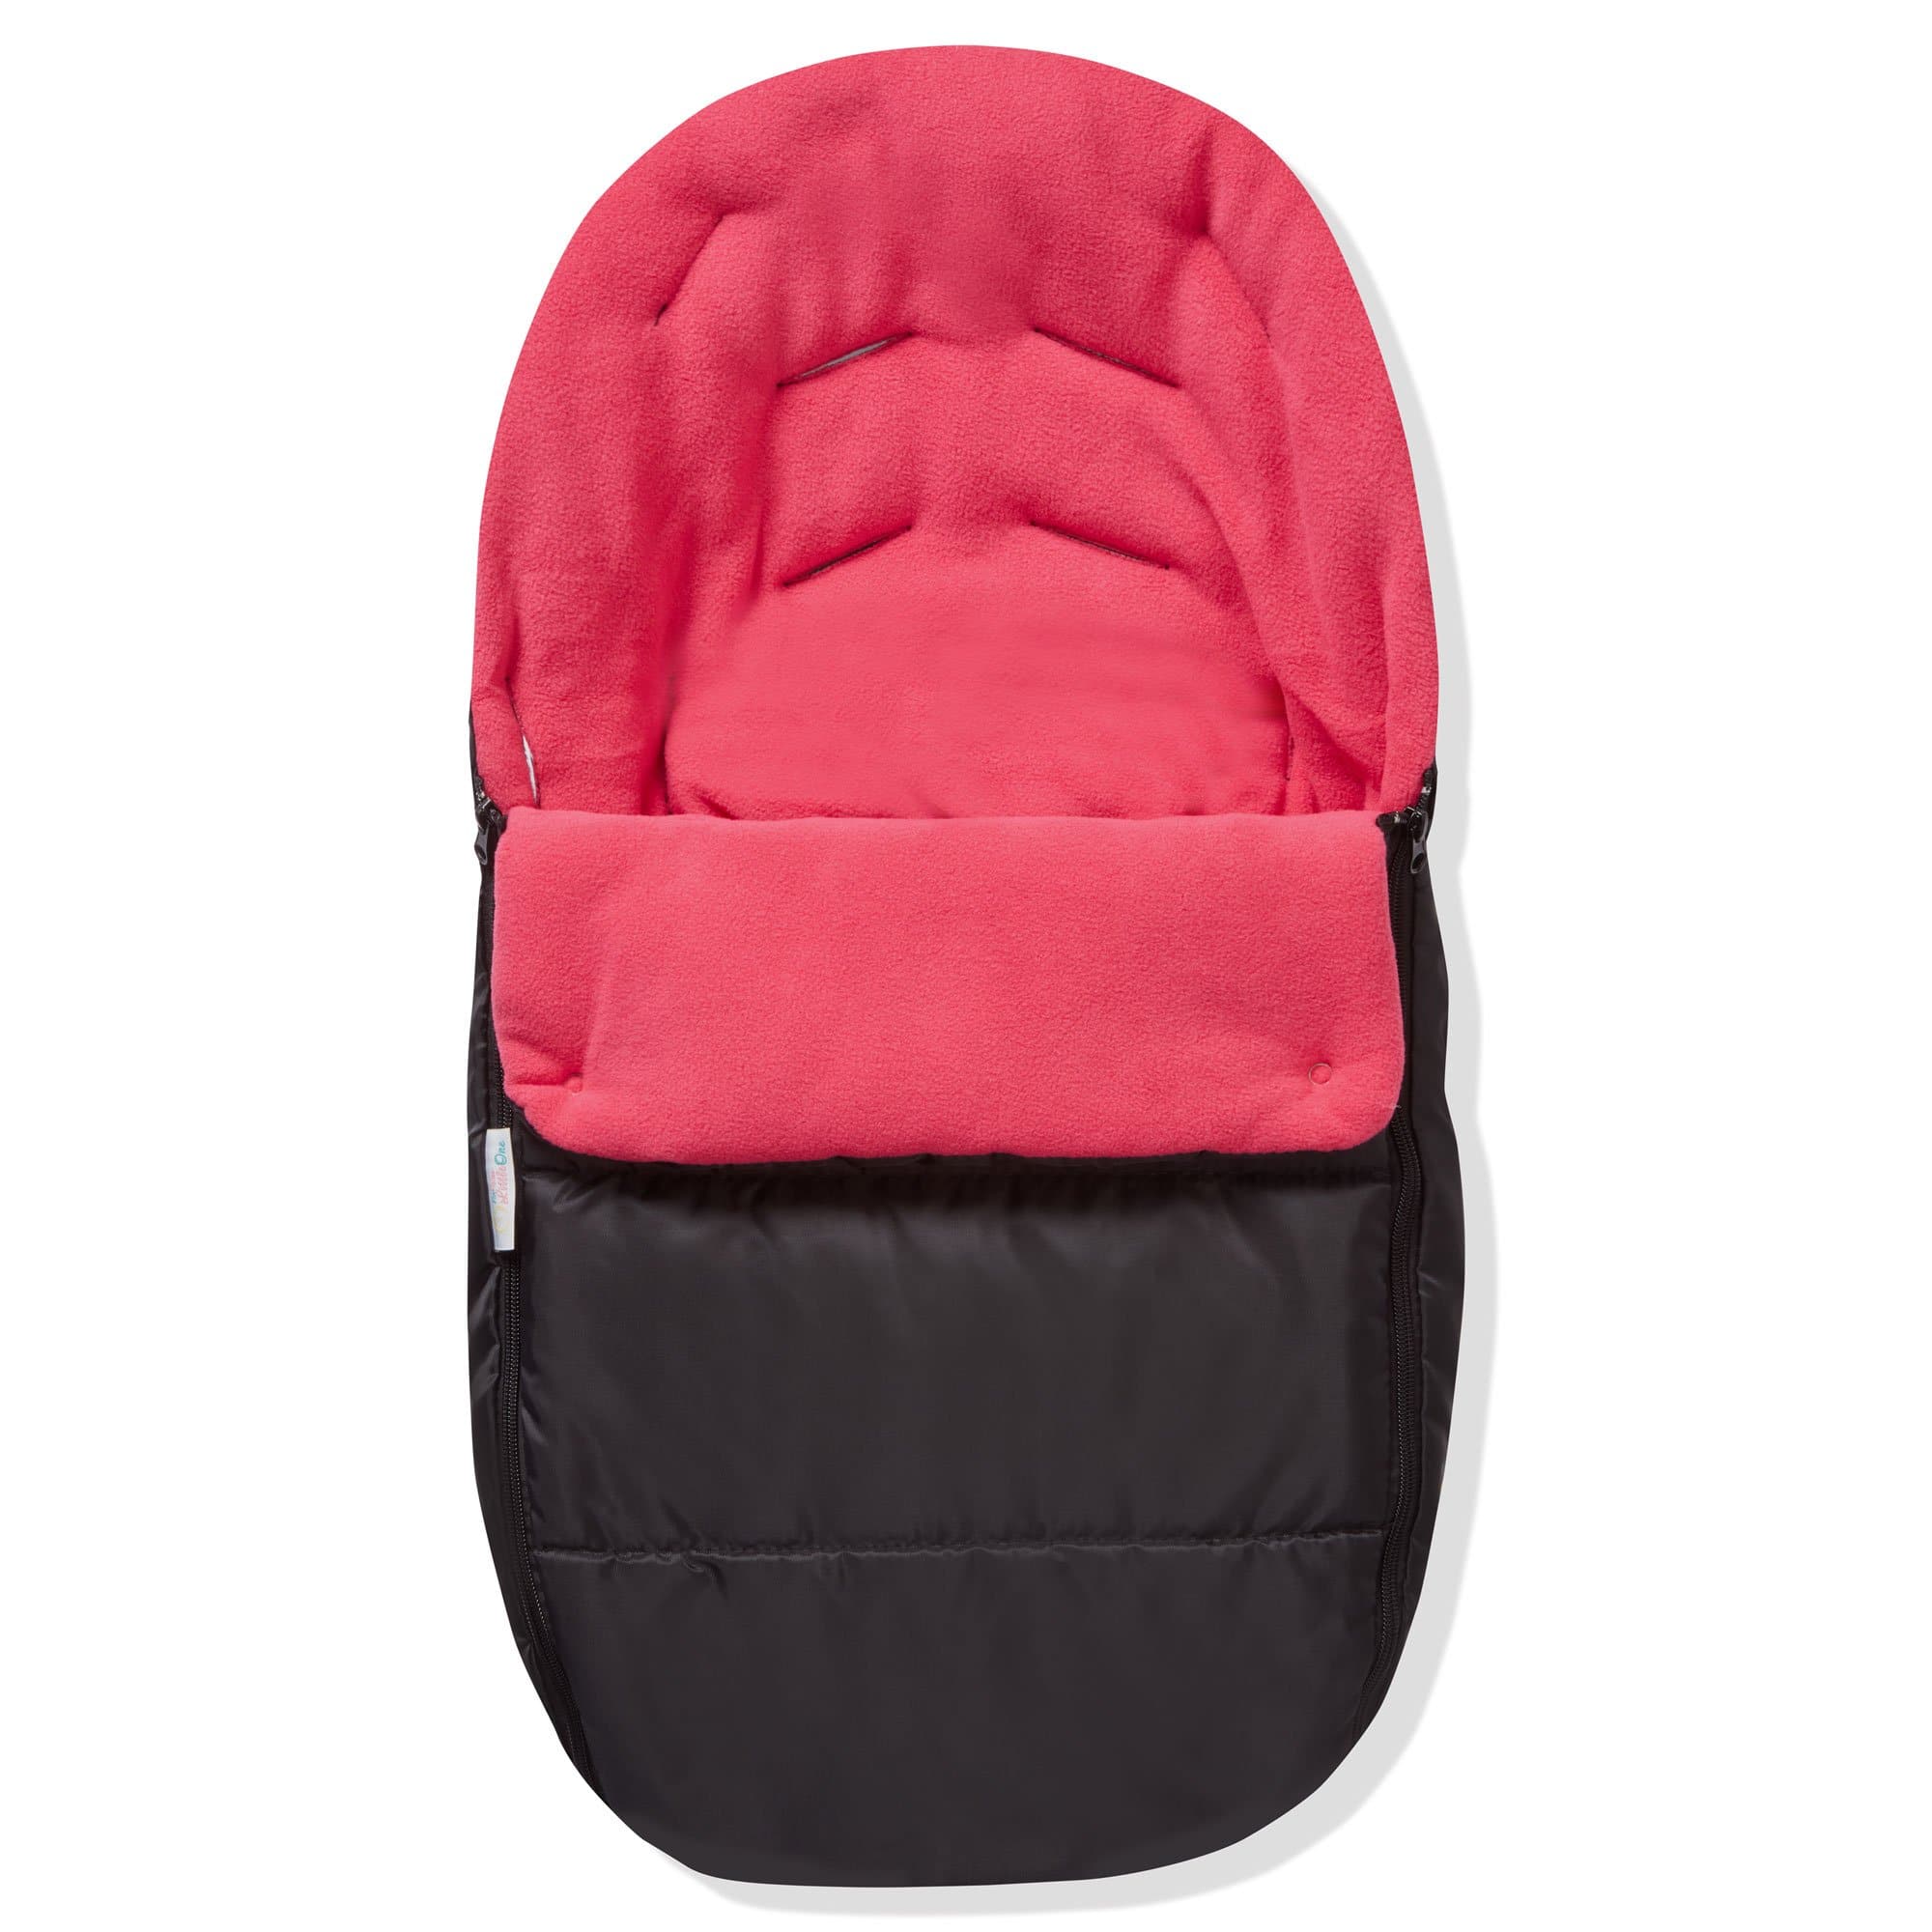 Premium Car Seat Footmuff / Cosy Toes Compatible With Bebecar - Pink Rose / Fits All Models | For Your Little One